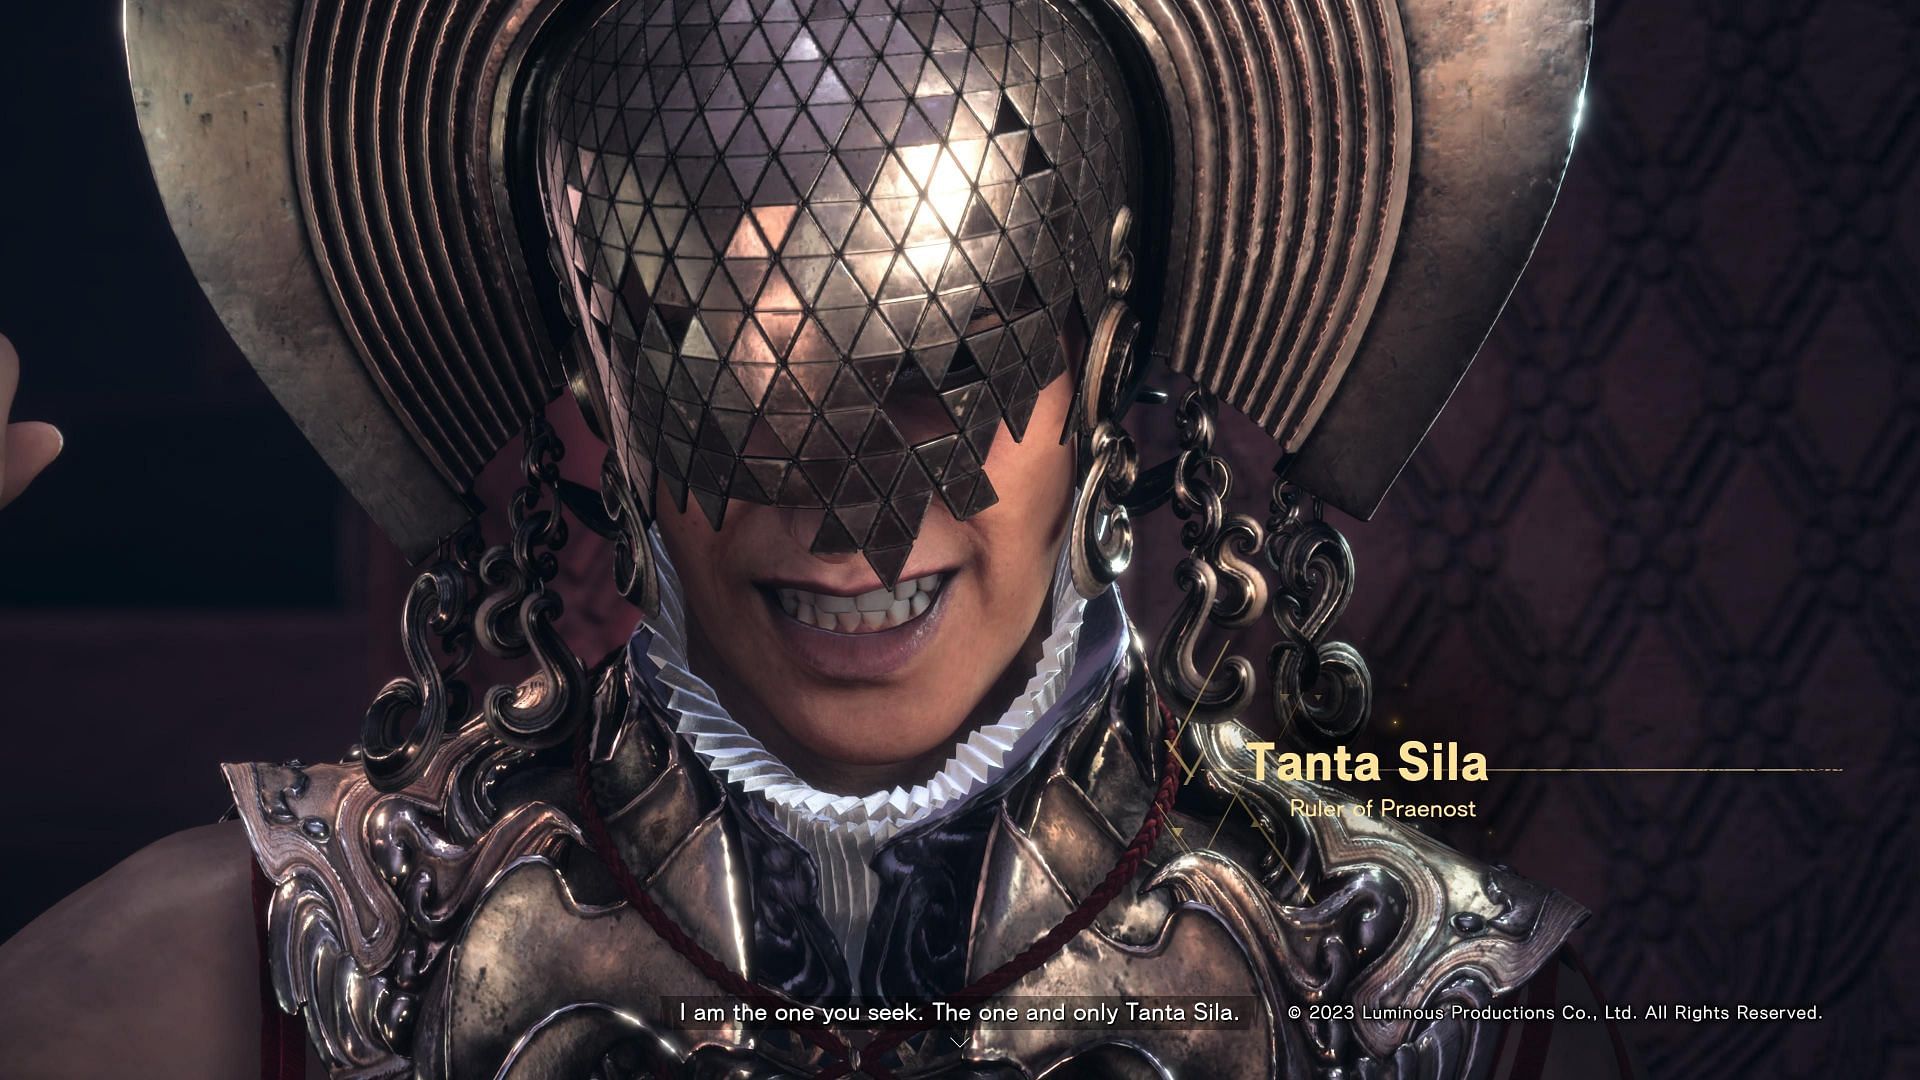 Tanta Silas is the first major battle in Forspoken.